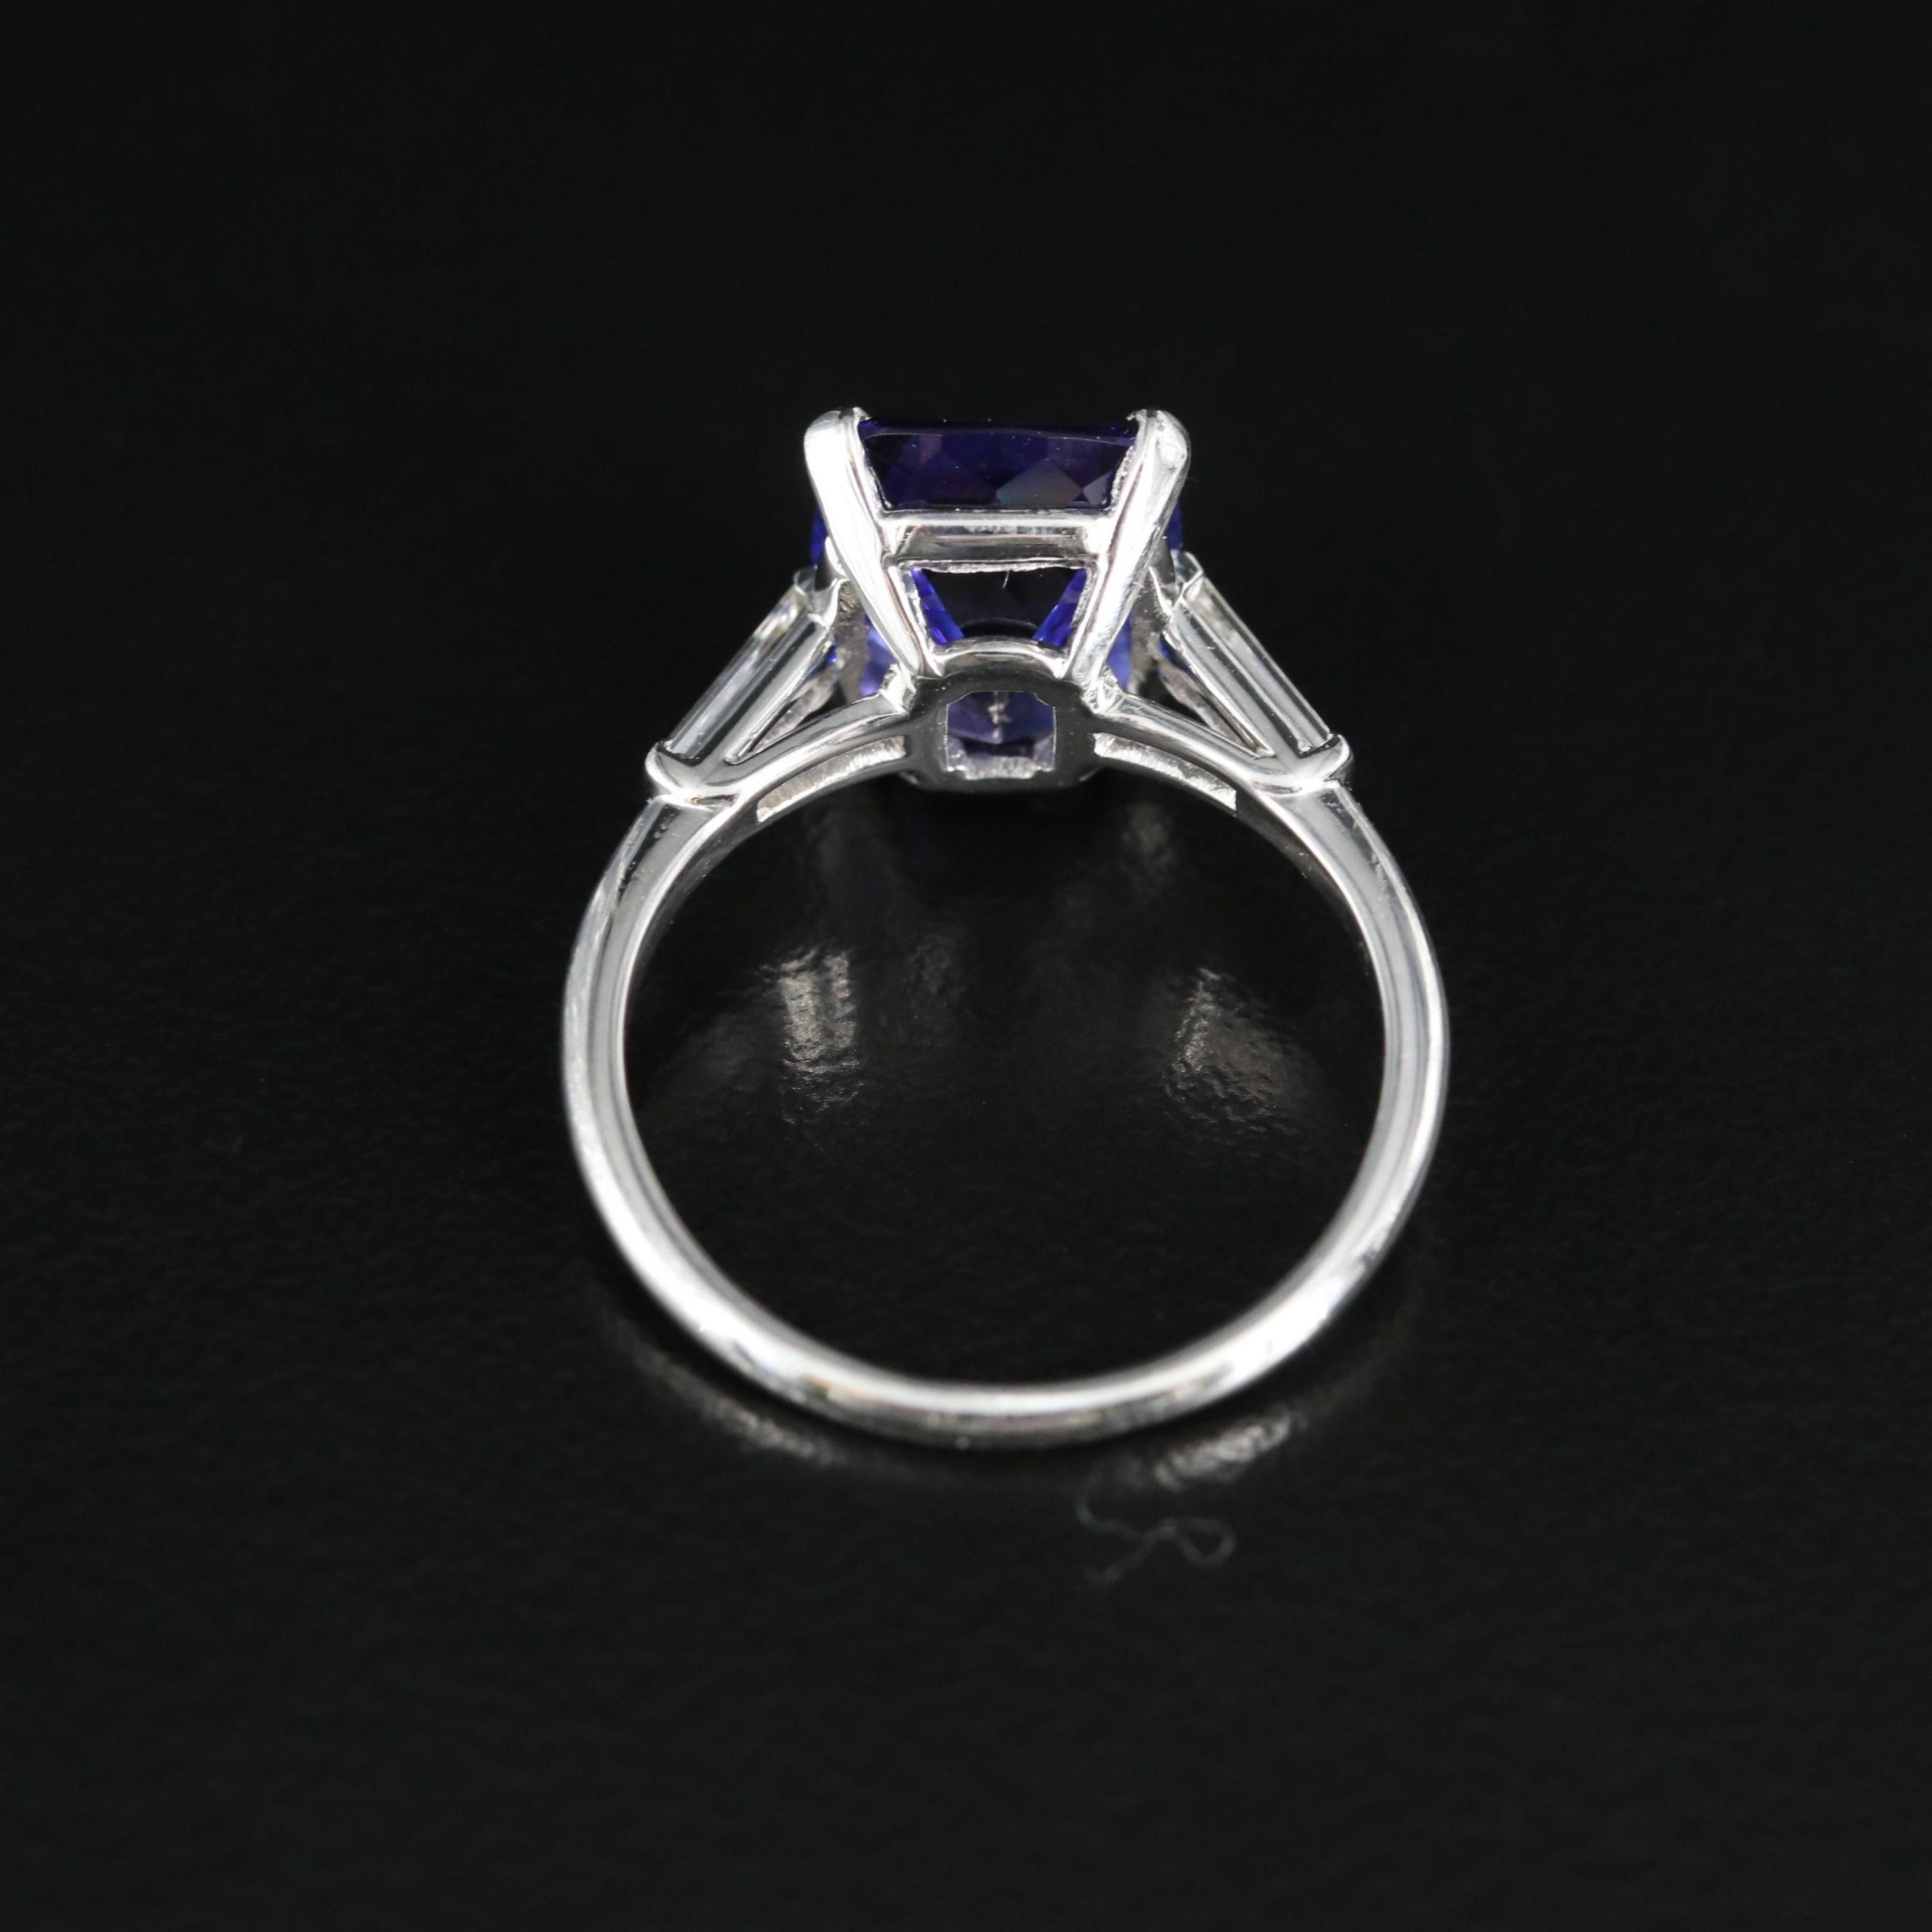 For Sale:  Antique 3.56 Carat Natural Tanzanite Diamond Engagement Ring in 18K Gold 2